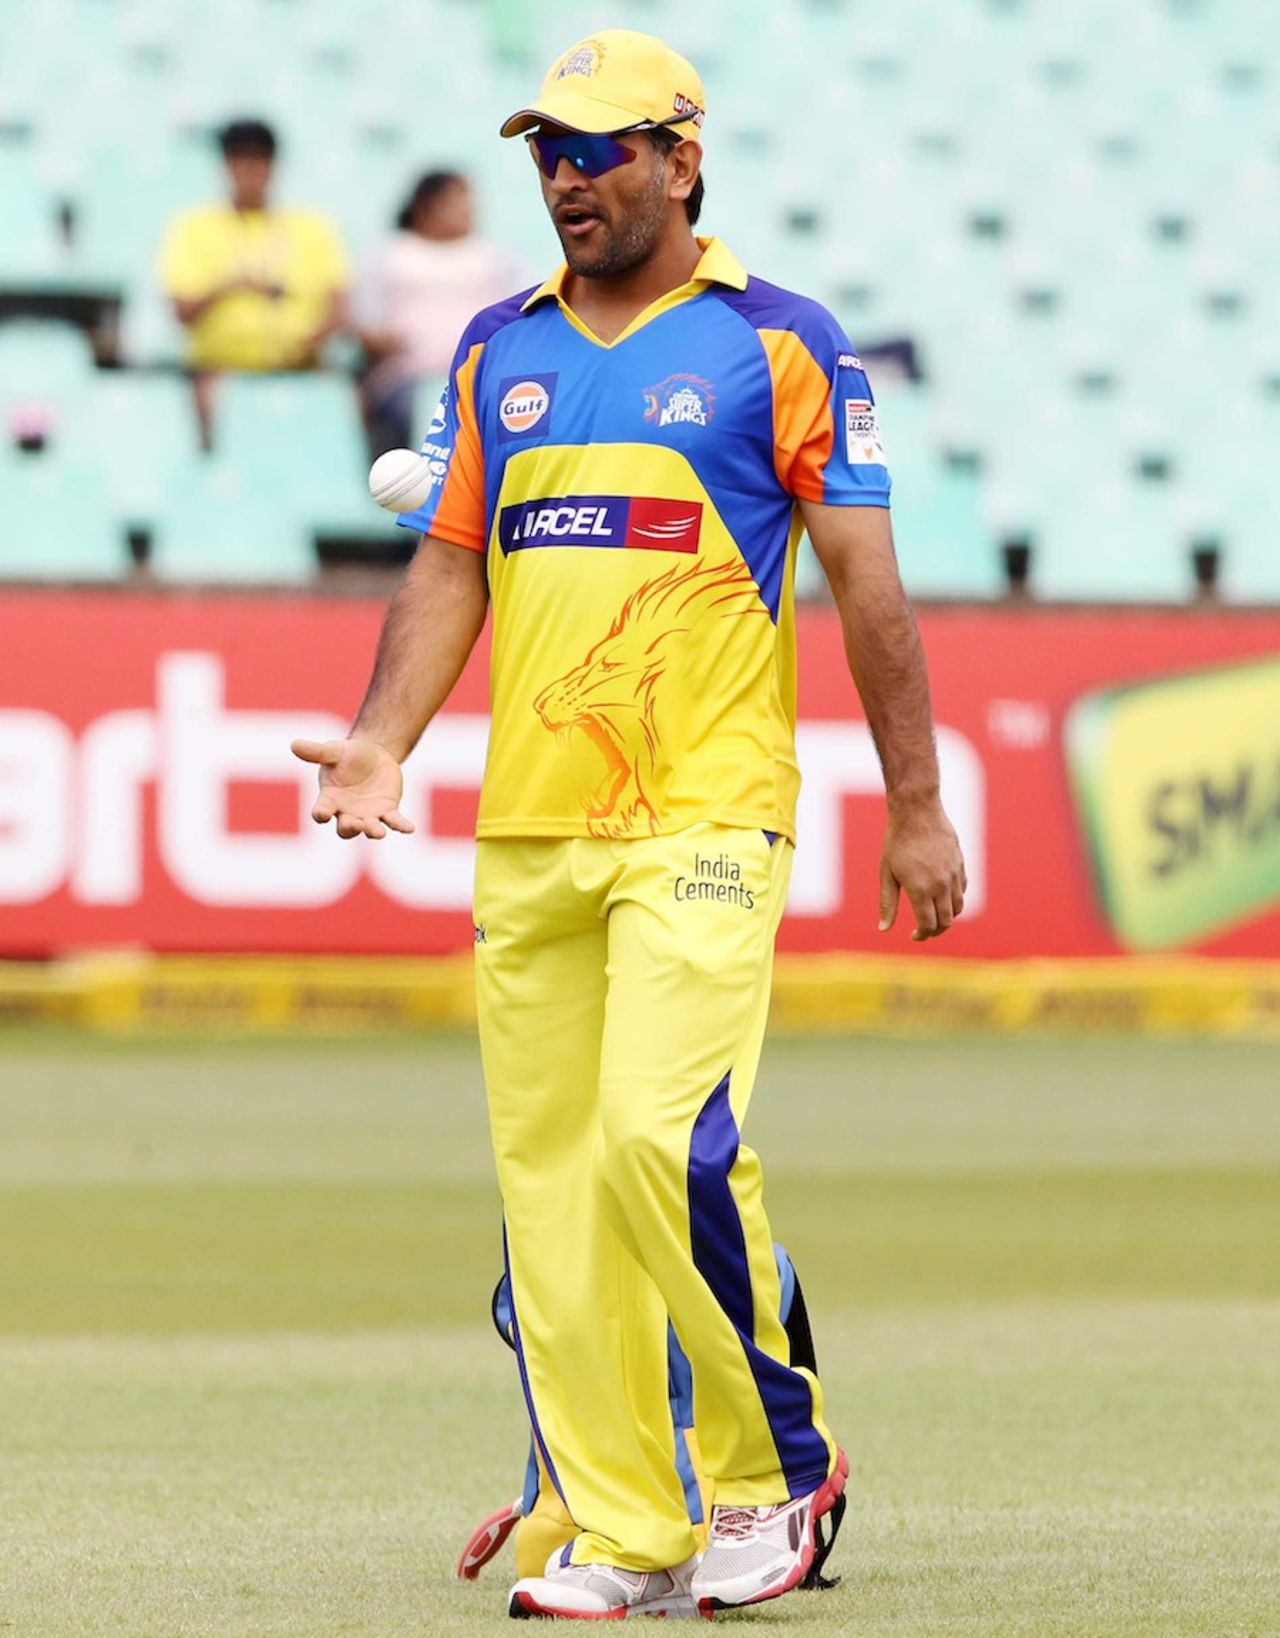 MS Dhoni on the field ahead of the game against Yorkshire, Chennai Super Kings v Yorkshire, Champions League T20, Durban, October 22, 2012